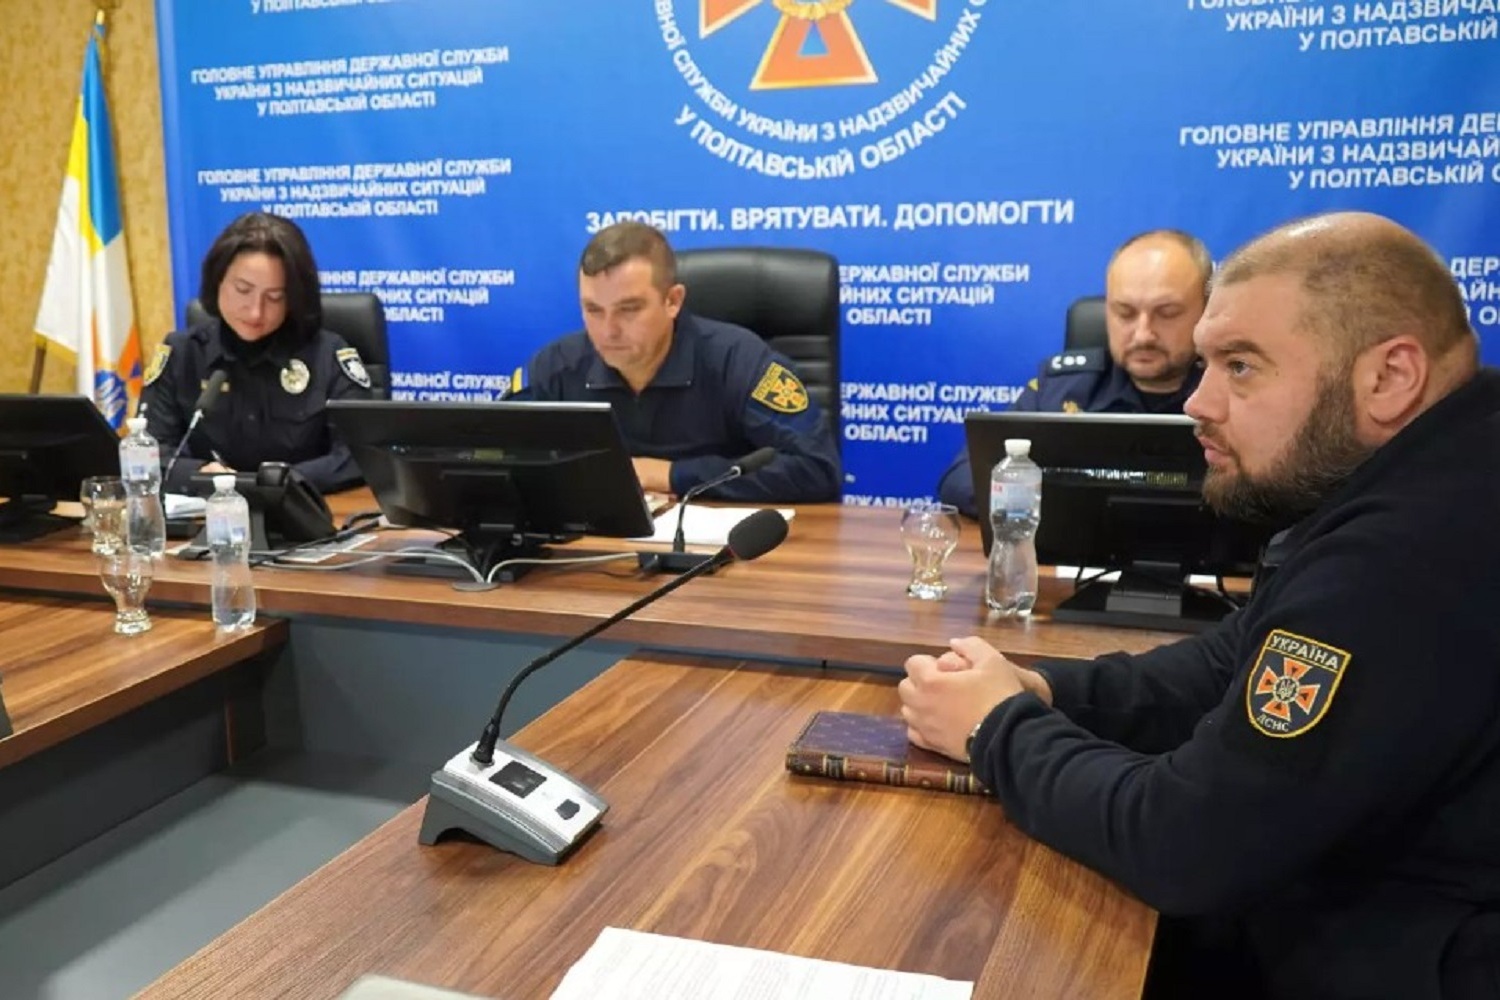 Municipalities of the Poltava Oblast learn about the measures that should be taken to ensure the safety of participants in the educational process